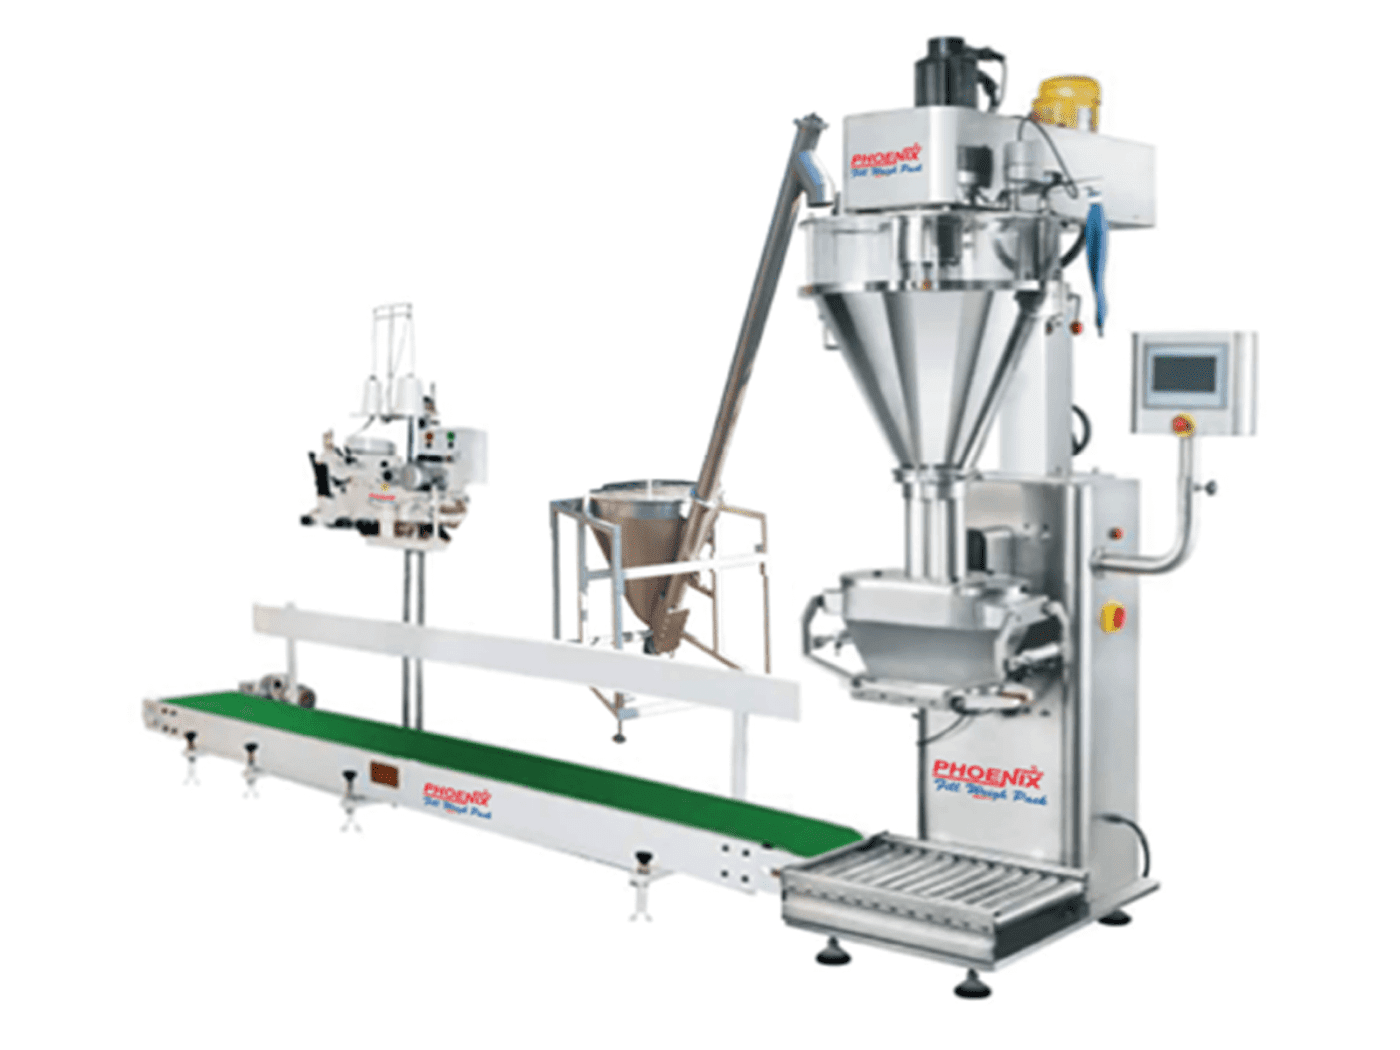 Ipm-25a Woven Bag Packing Machine with Auger Filler & Stitching Machine